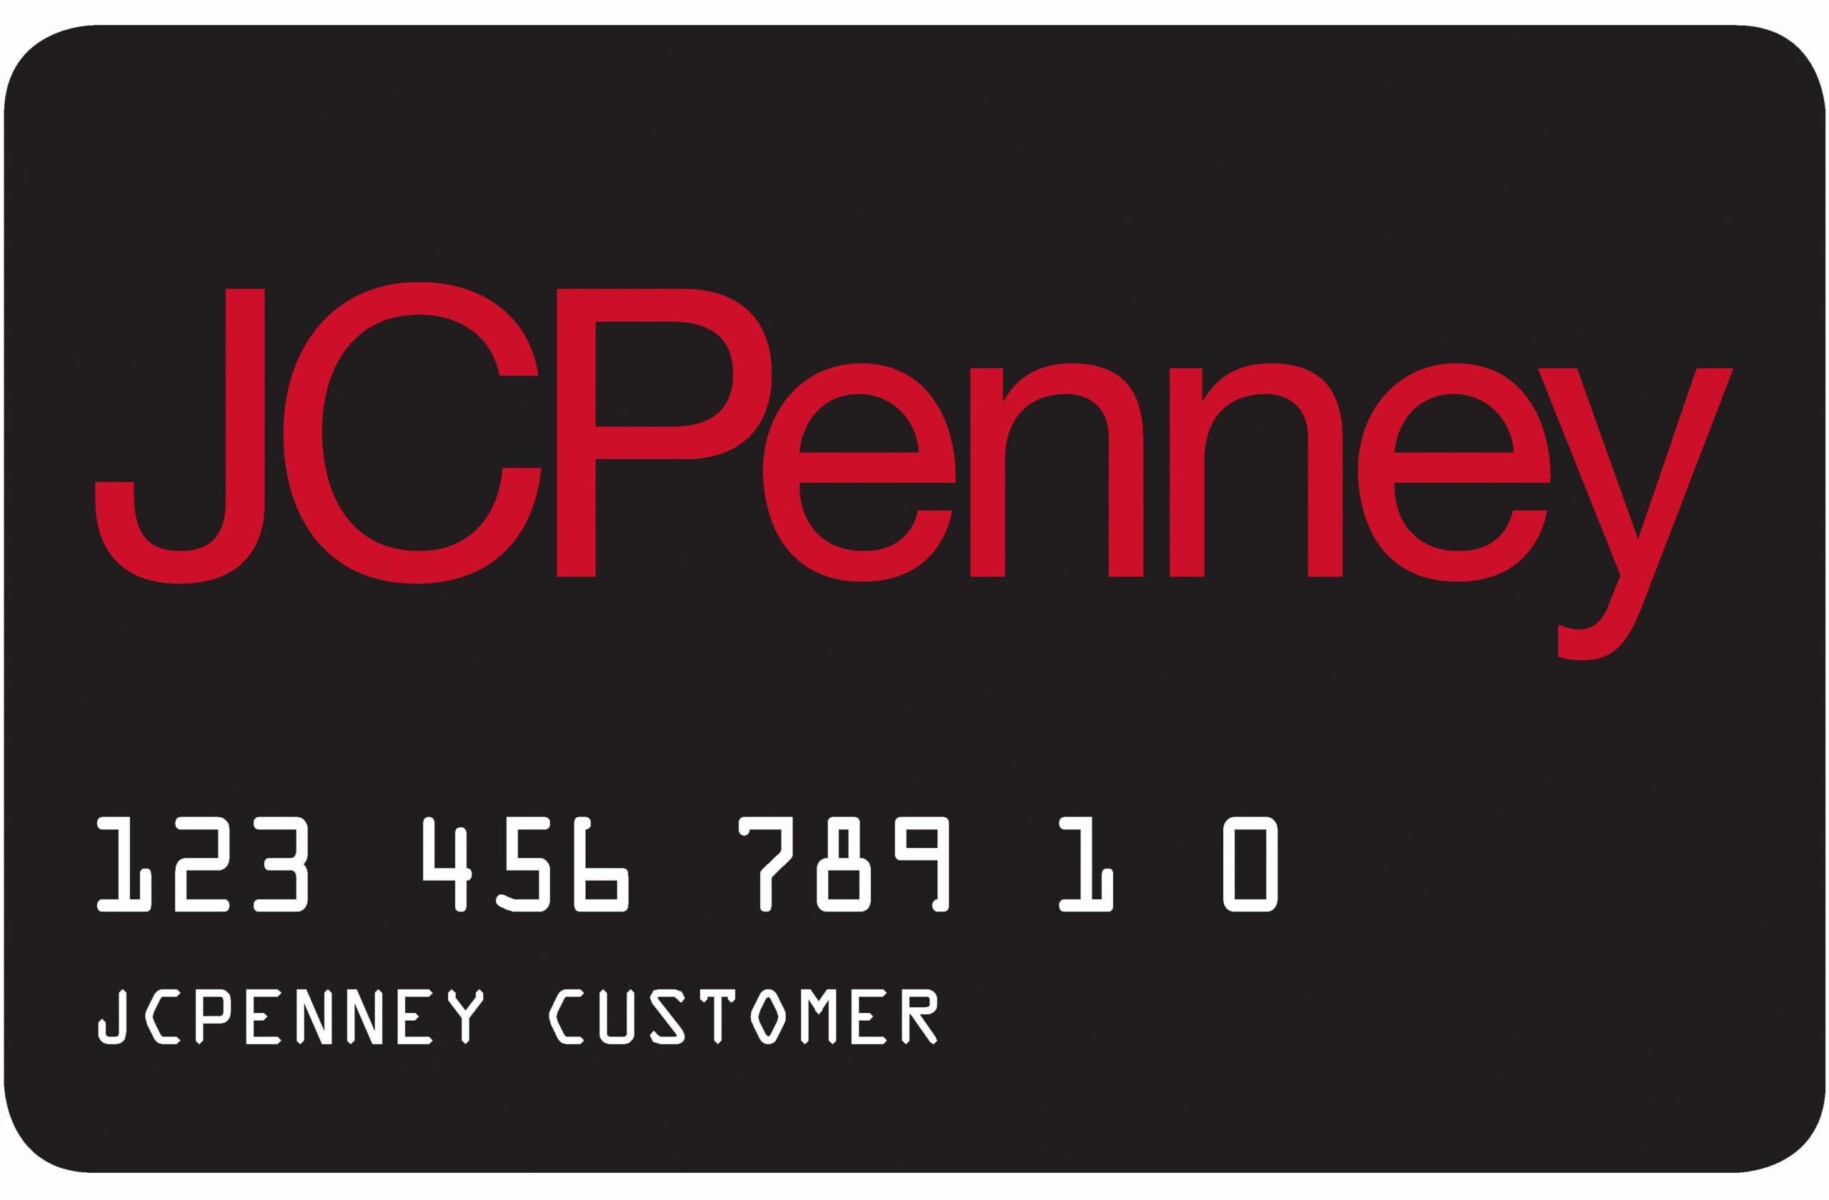 jcpenney-credit-card-everything-you-need-to-know-devicemag